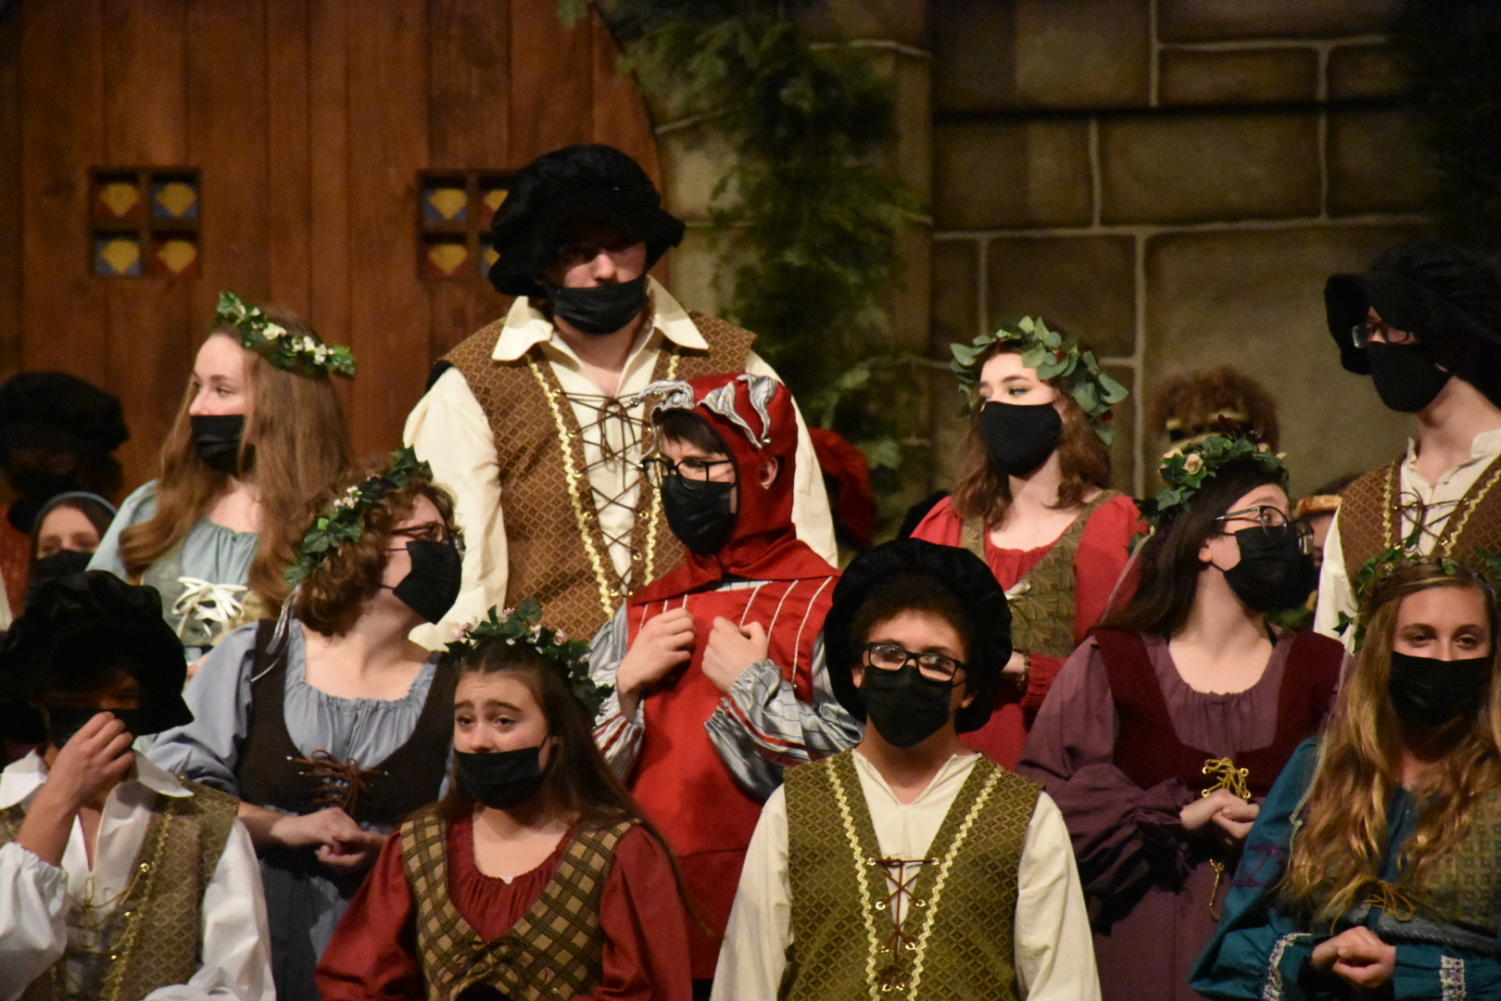 Madrigals+returns+in-person+%5Bphoto+gallery%5D